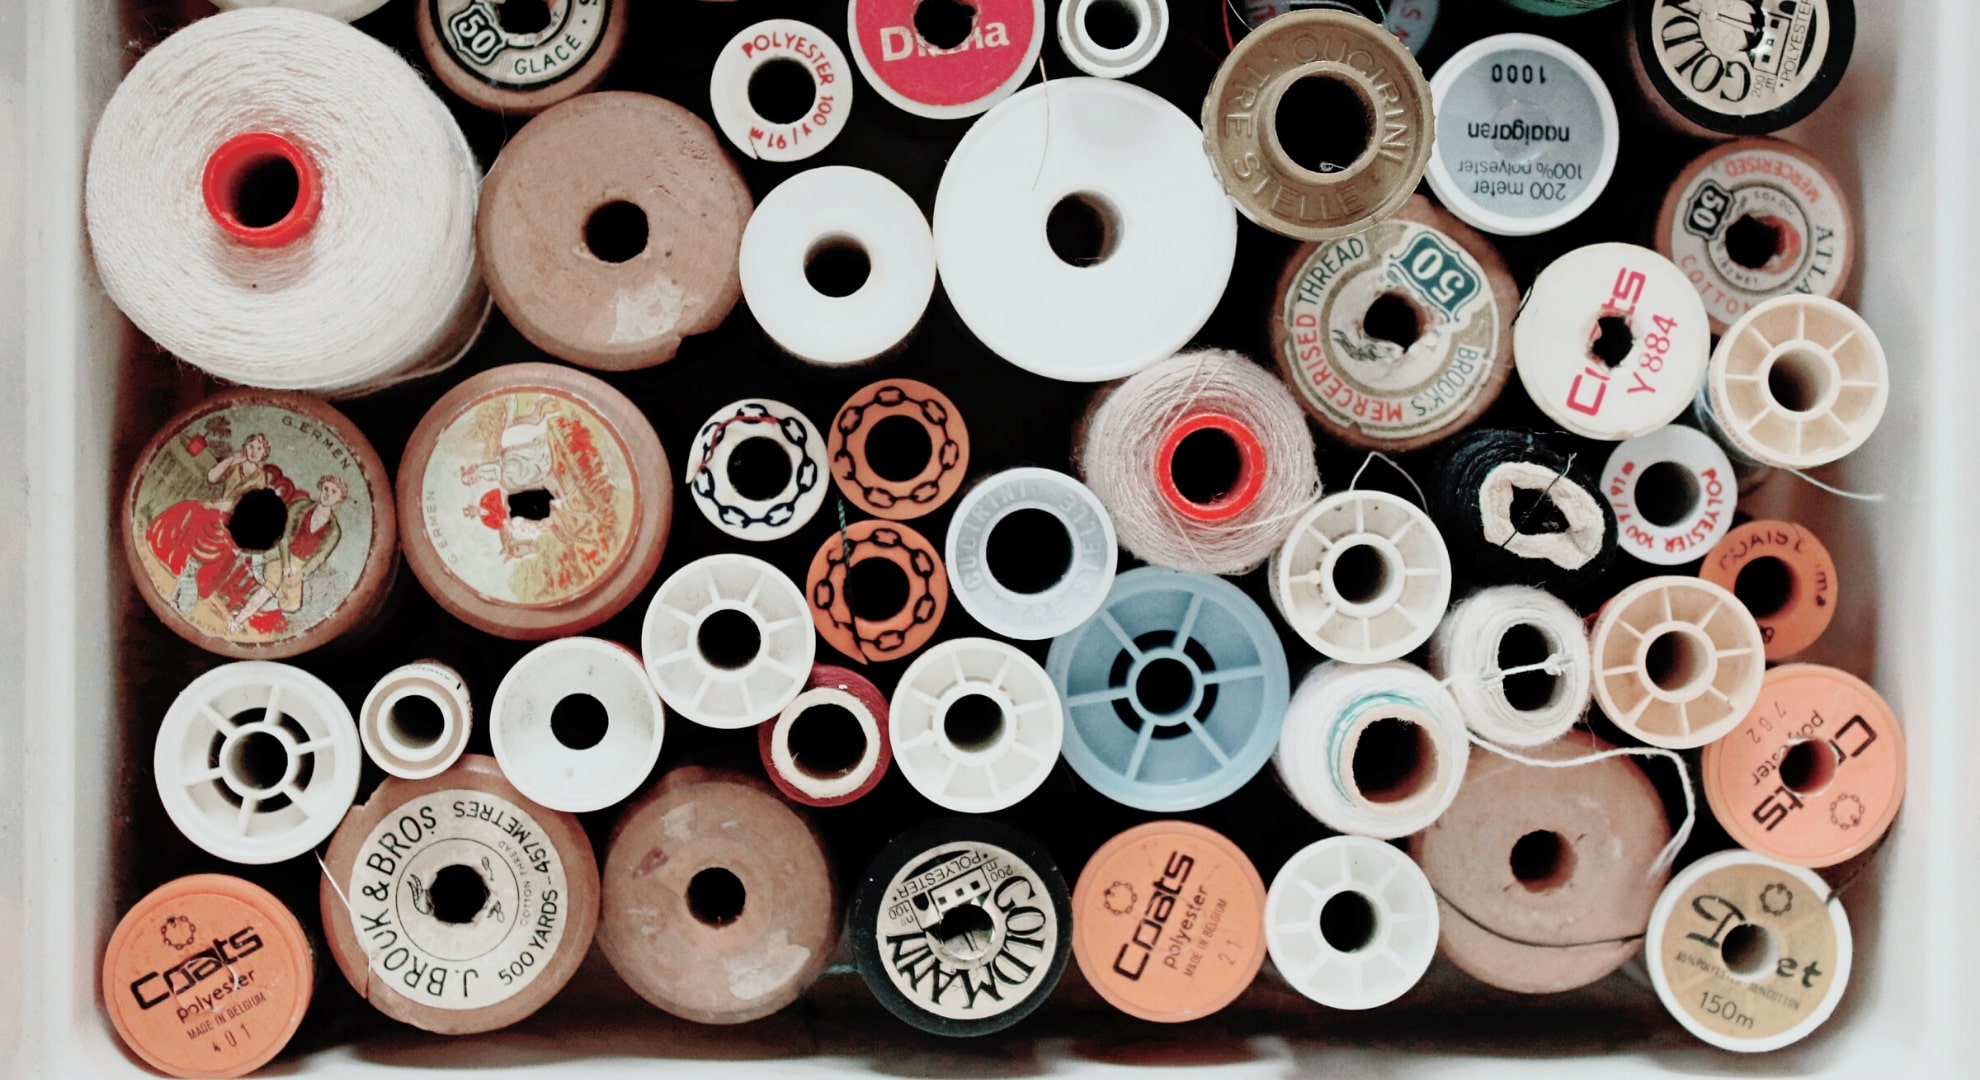 Rolls of material and fabric